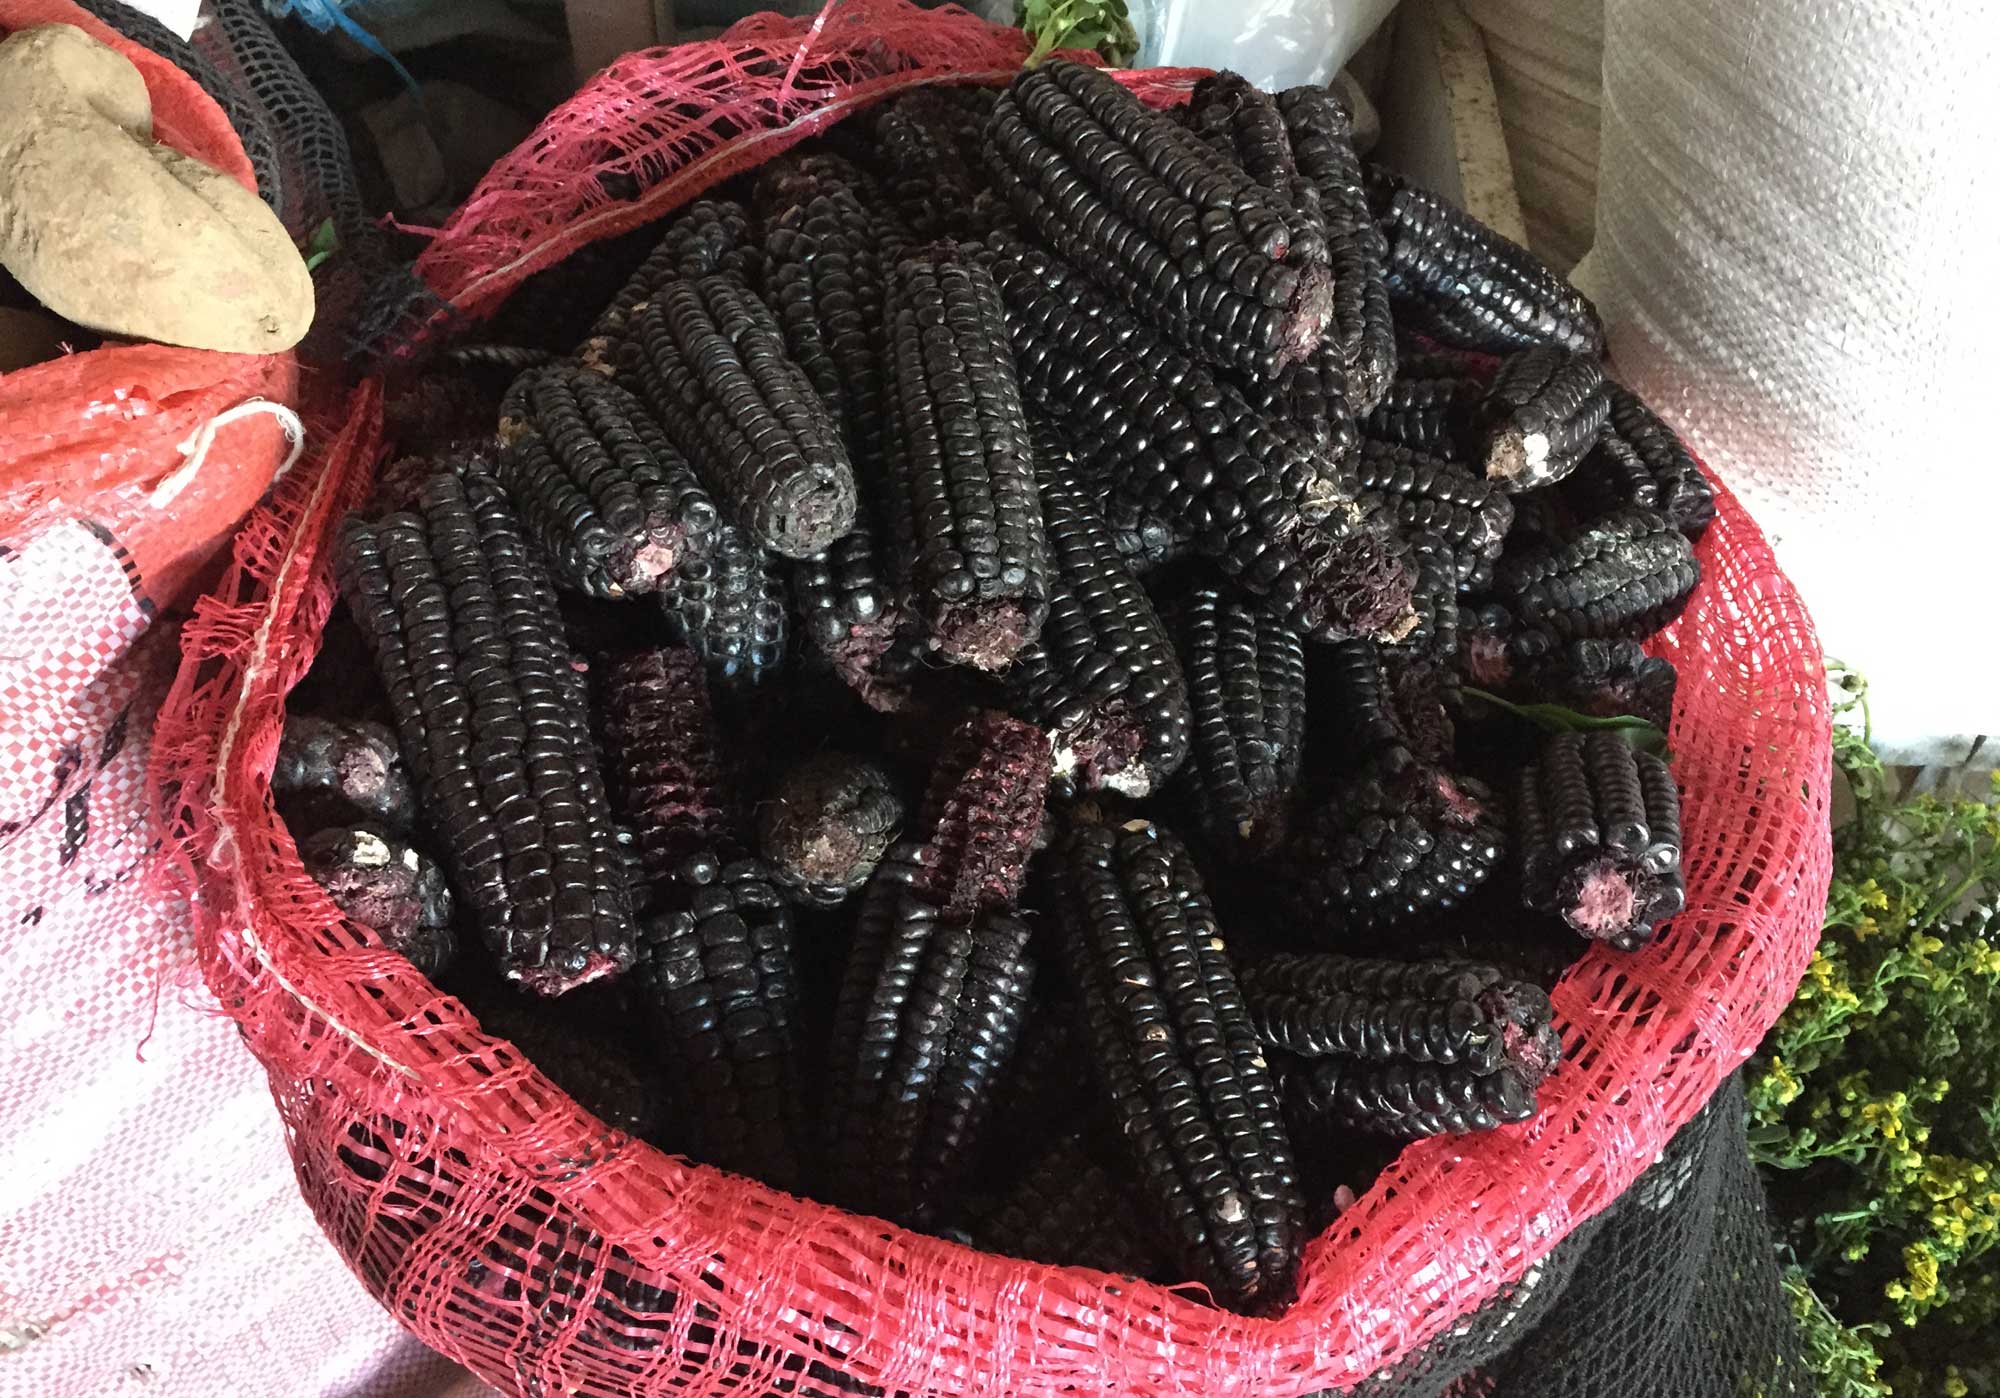 Photograph of maize morada from Peru. The photo shows ears of maize with nearly black kernels in a bag made of red plastic strands.